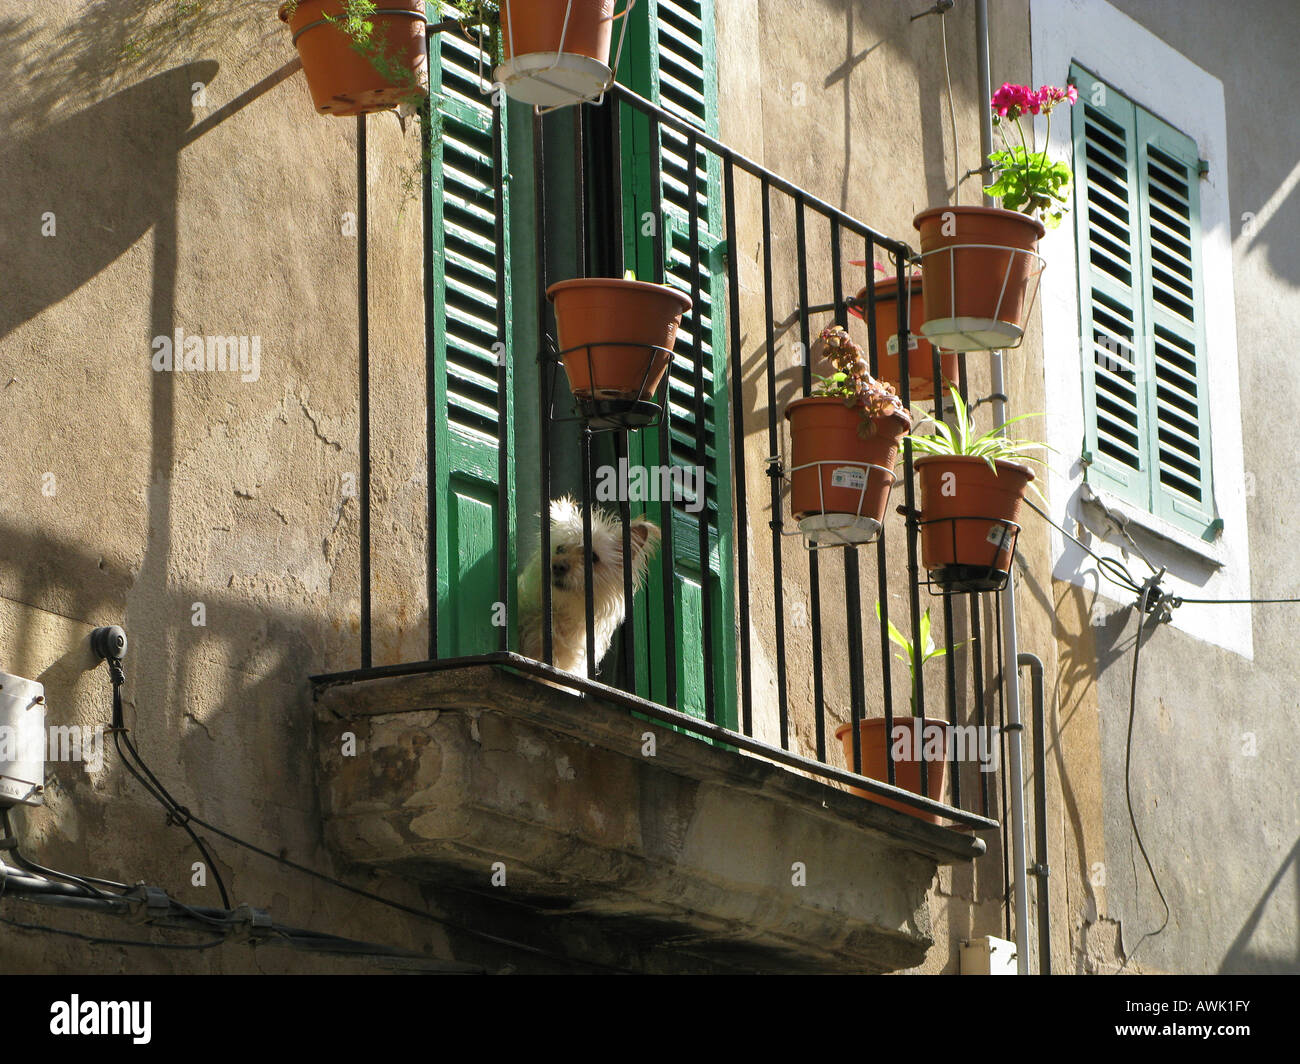 Small white pet dog keeps watch on balcony with flower pots, Palma, Mallorca, Spain. There are green shutters on the window Stock Photo